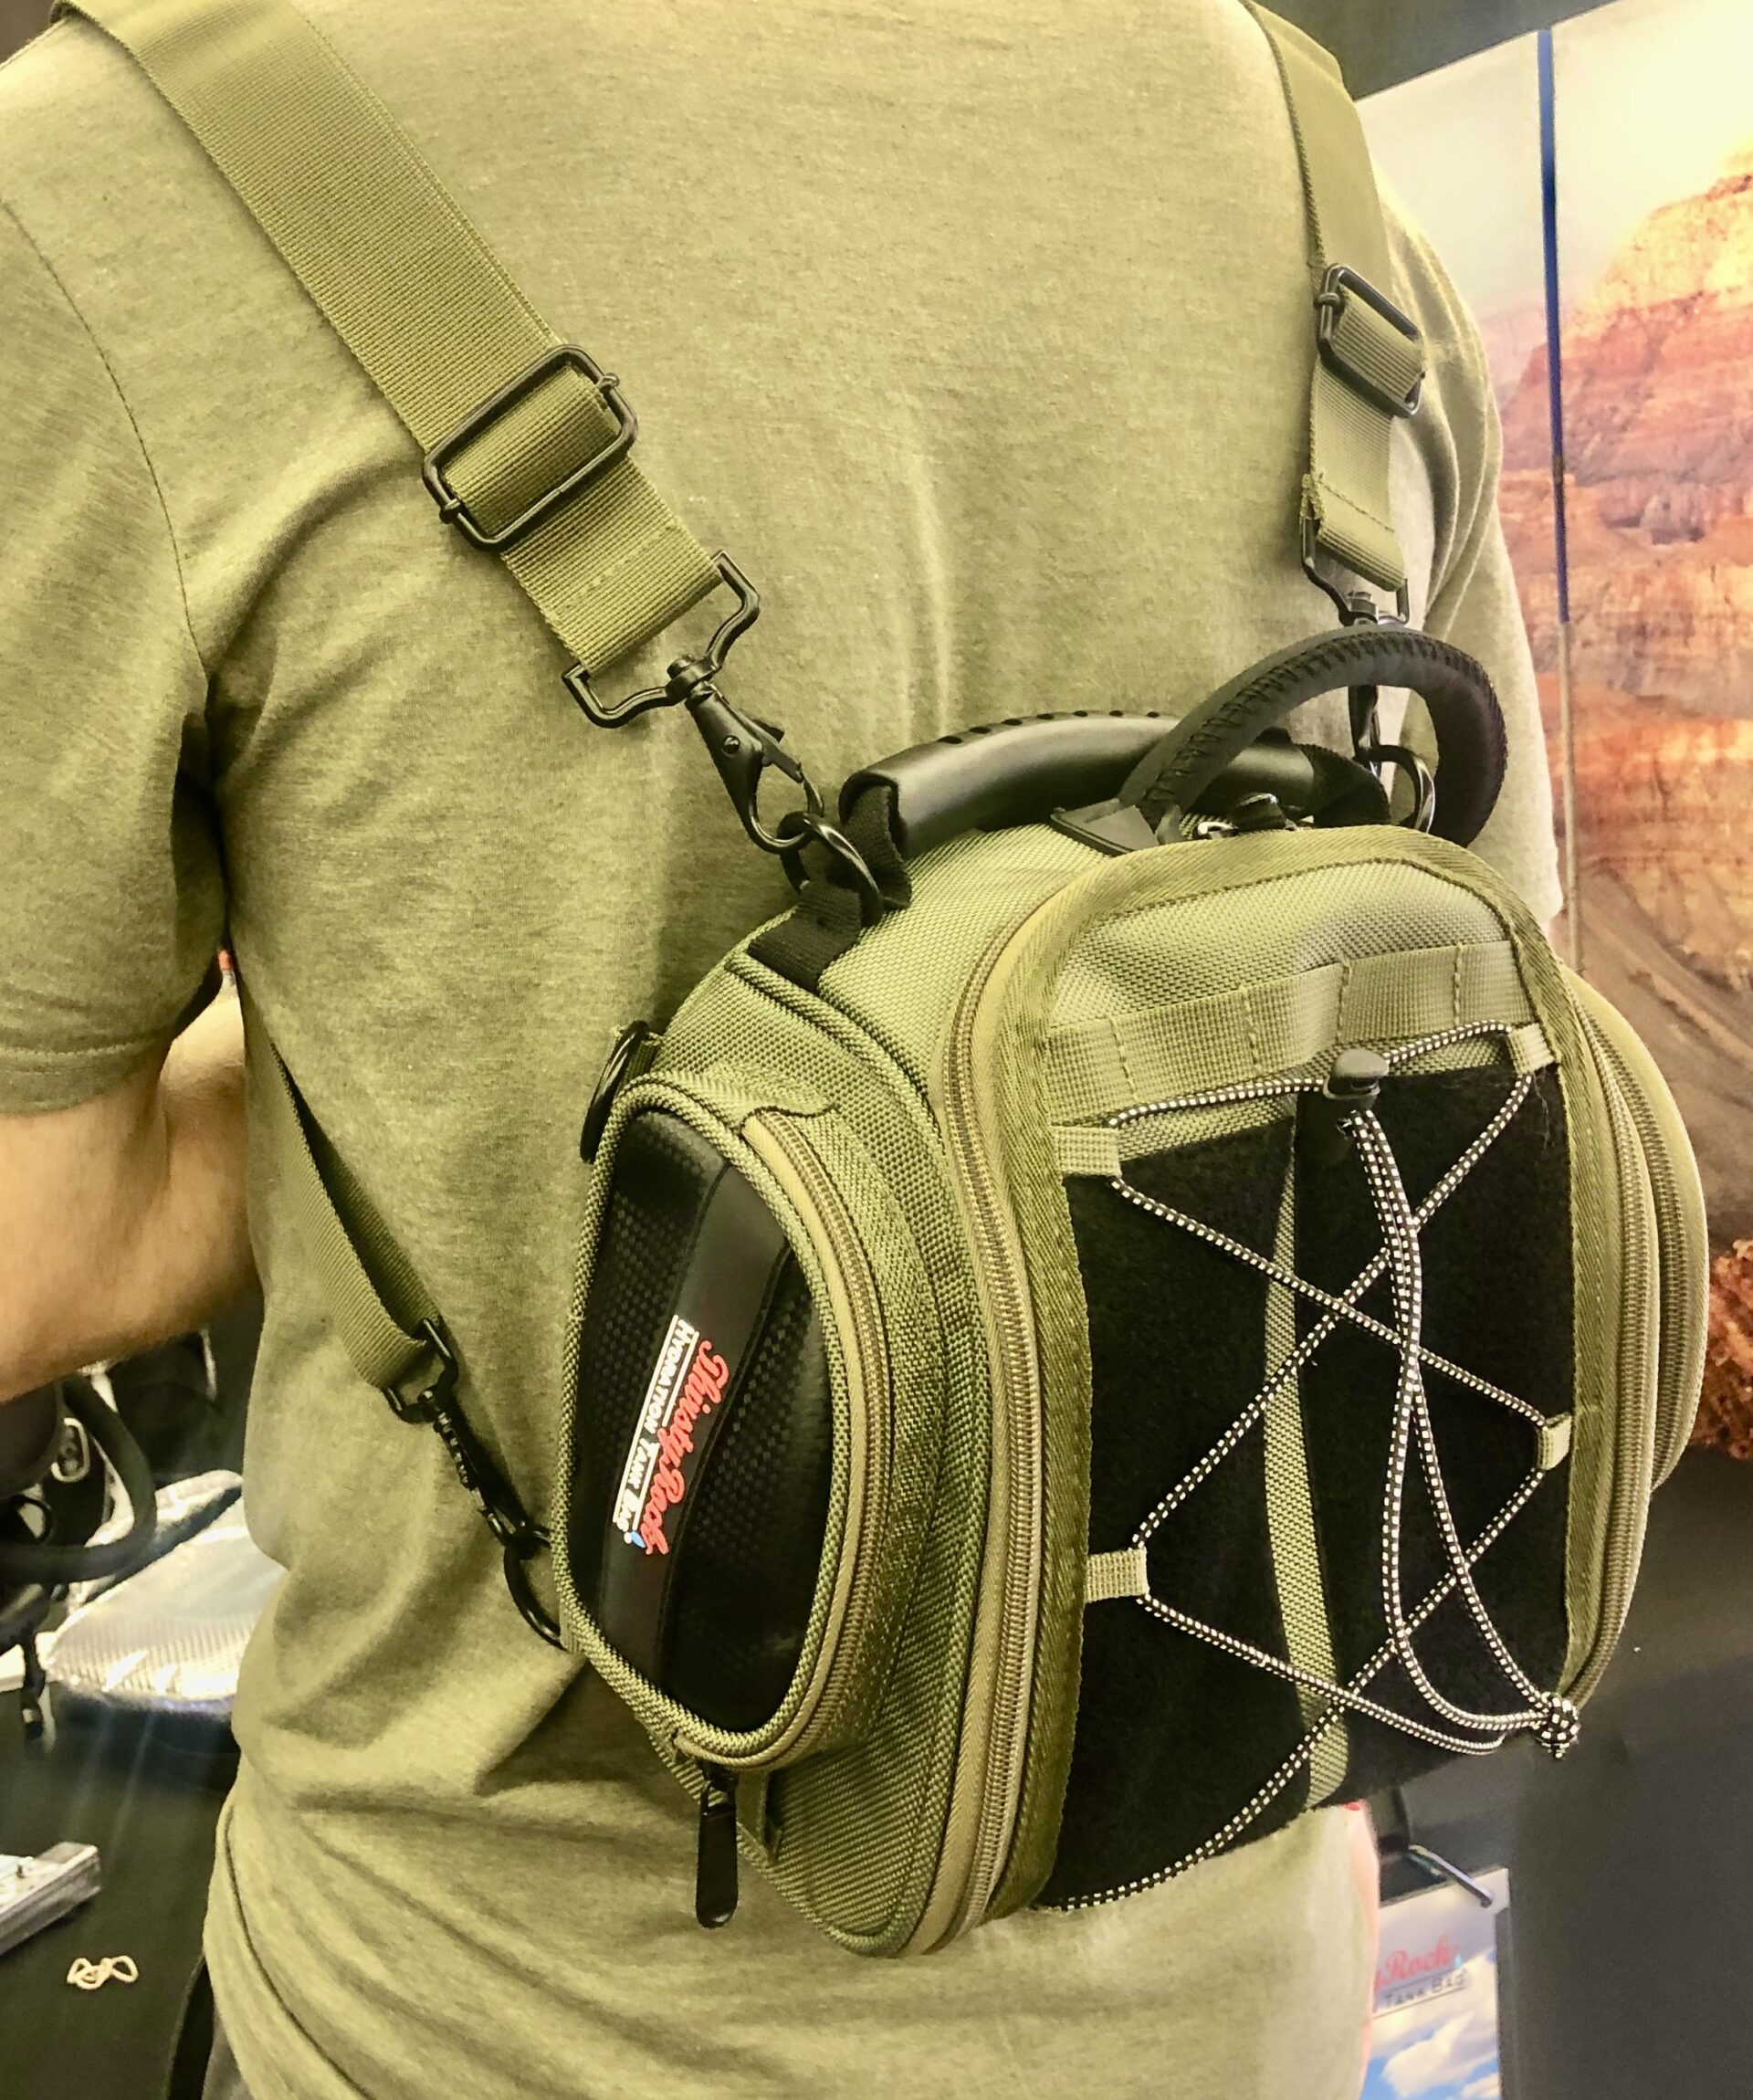 OffRoad Hydration Tank Bag (Military Green) with backpack straps